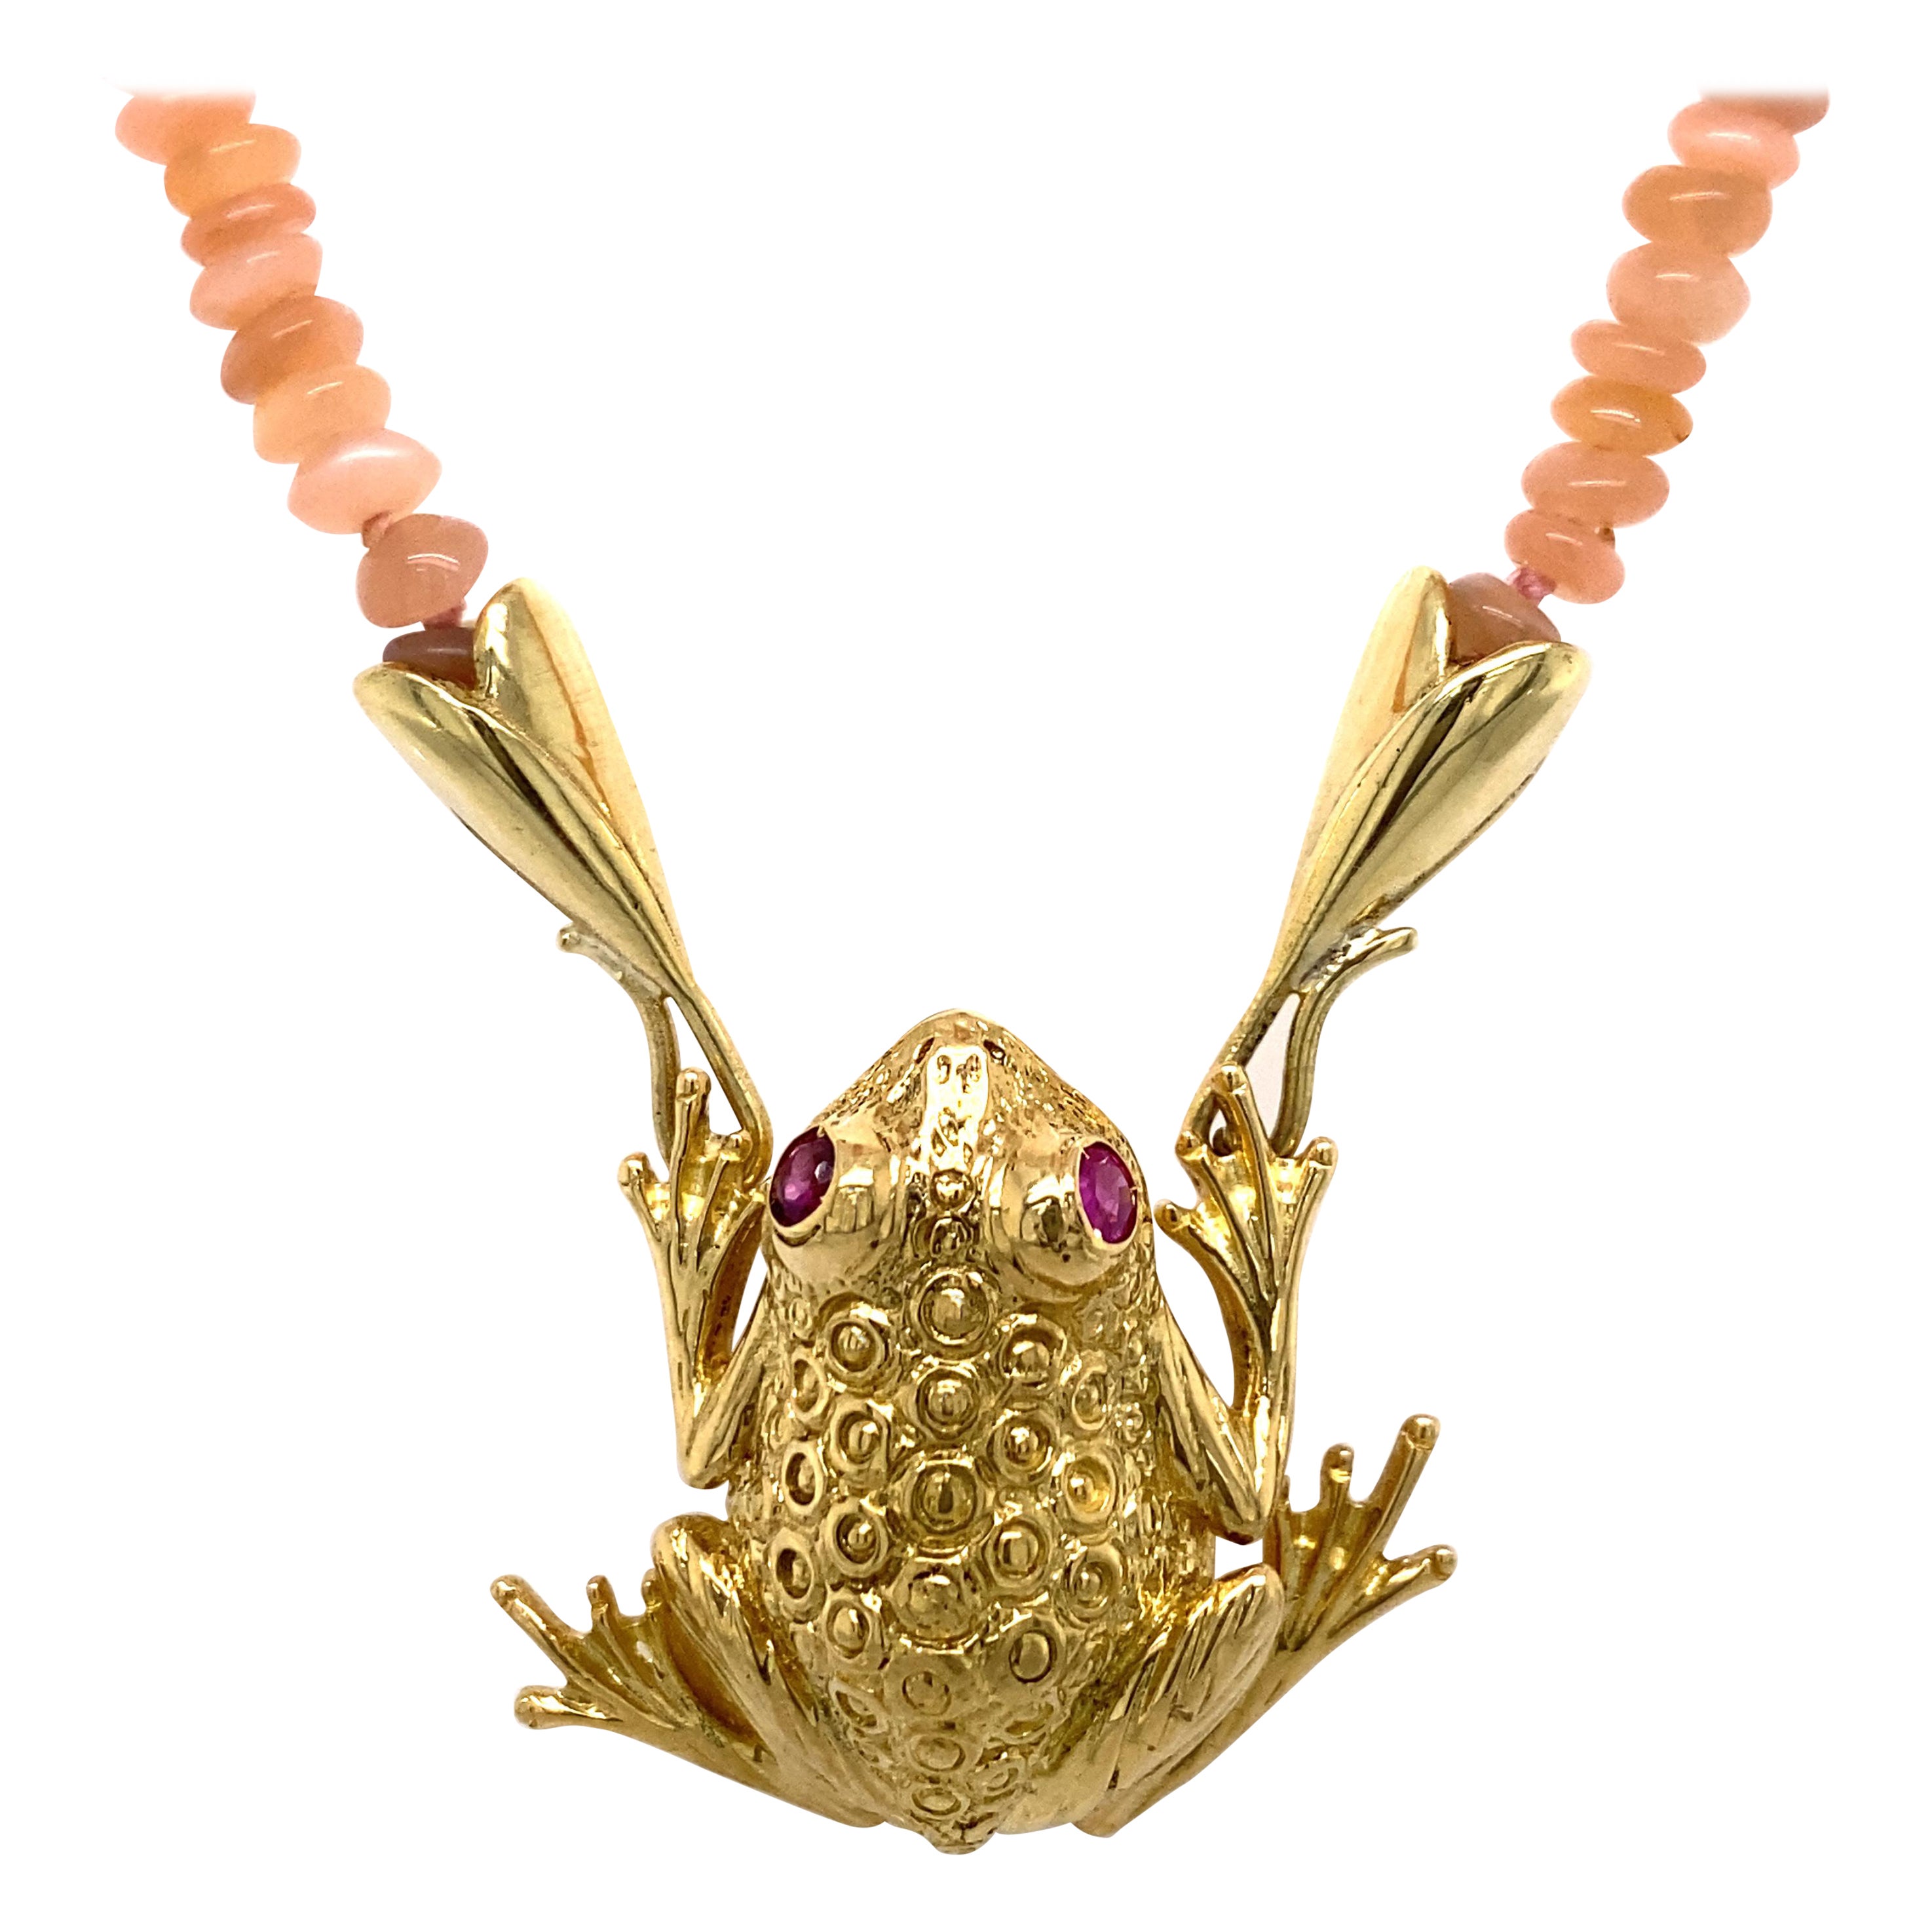 "Curly the Frog" Necklace in 18 Karat Gold with Ruby Eyes and Moonstone Chain For Sale